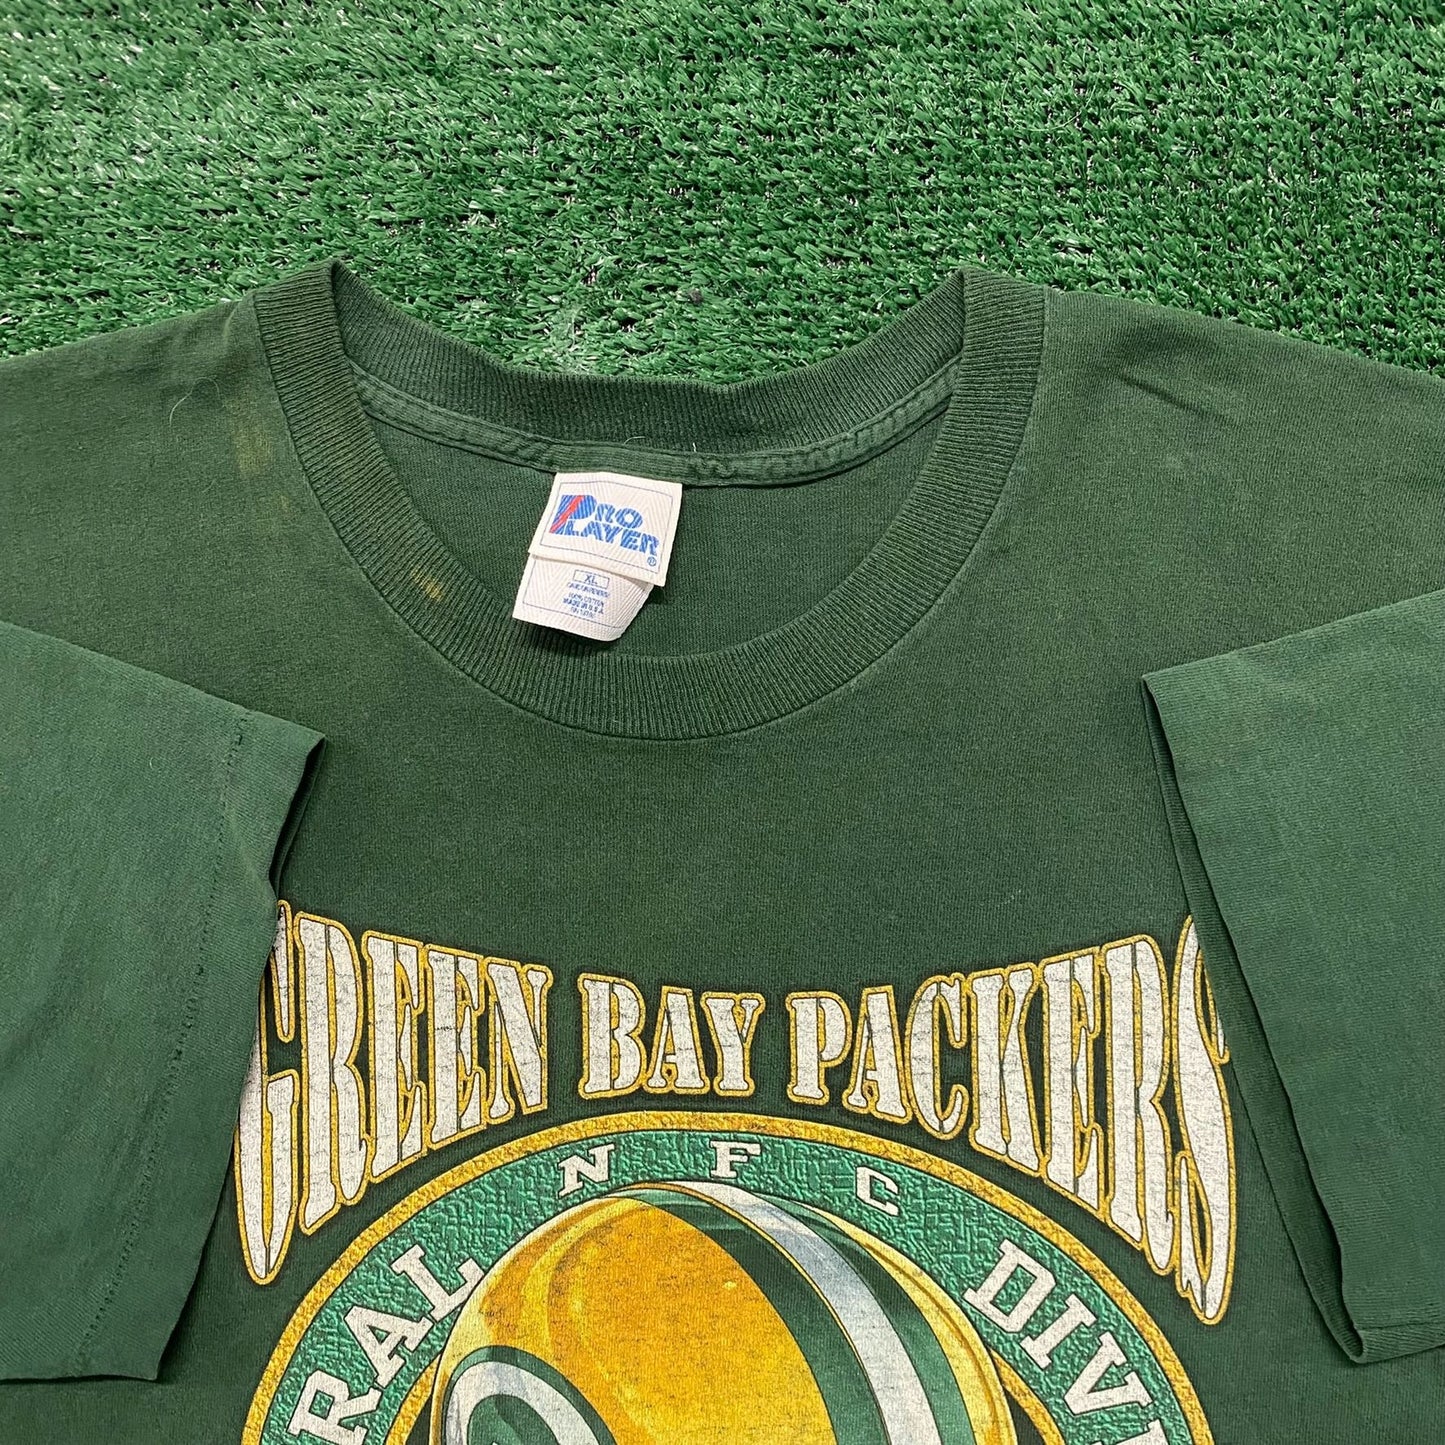 Vintage 90s Essential Baggy Green Bay Packers Sports T-Shirt